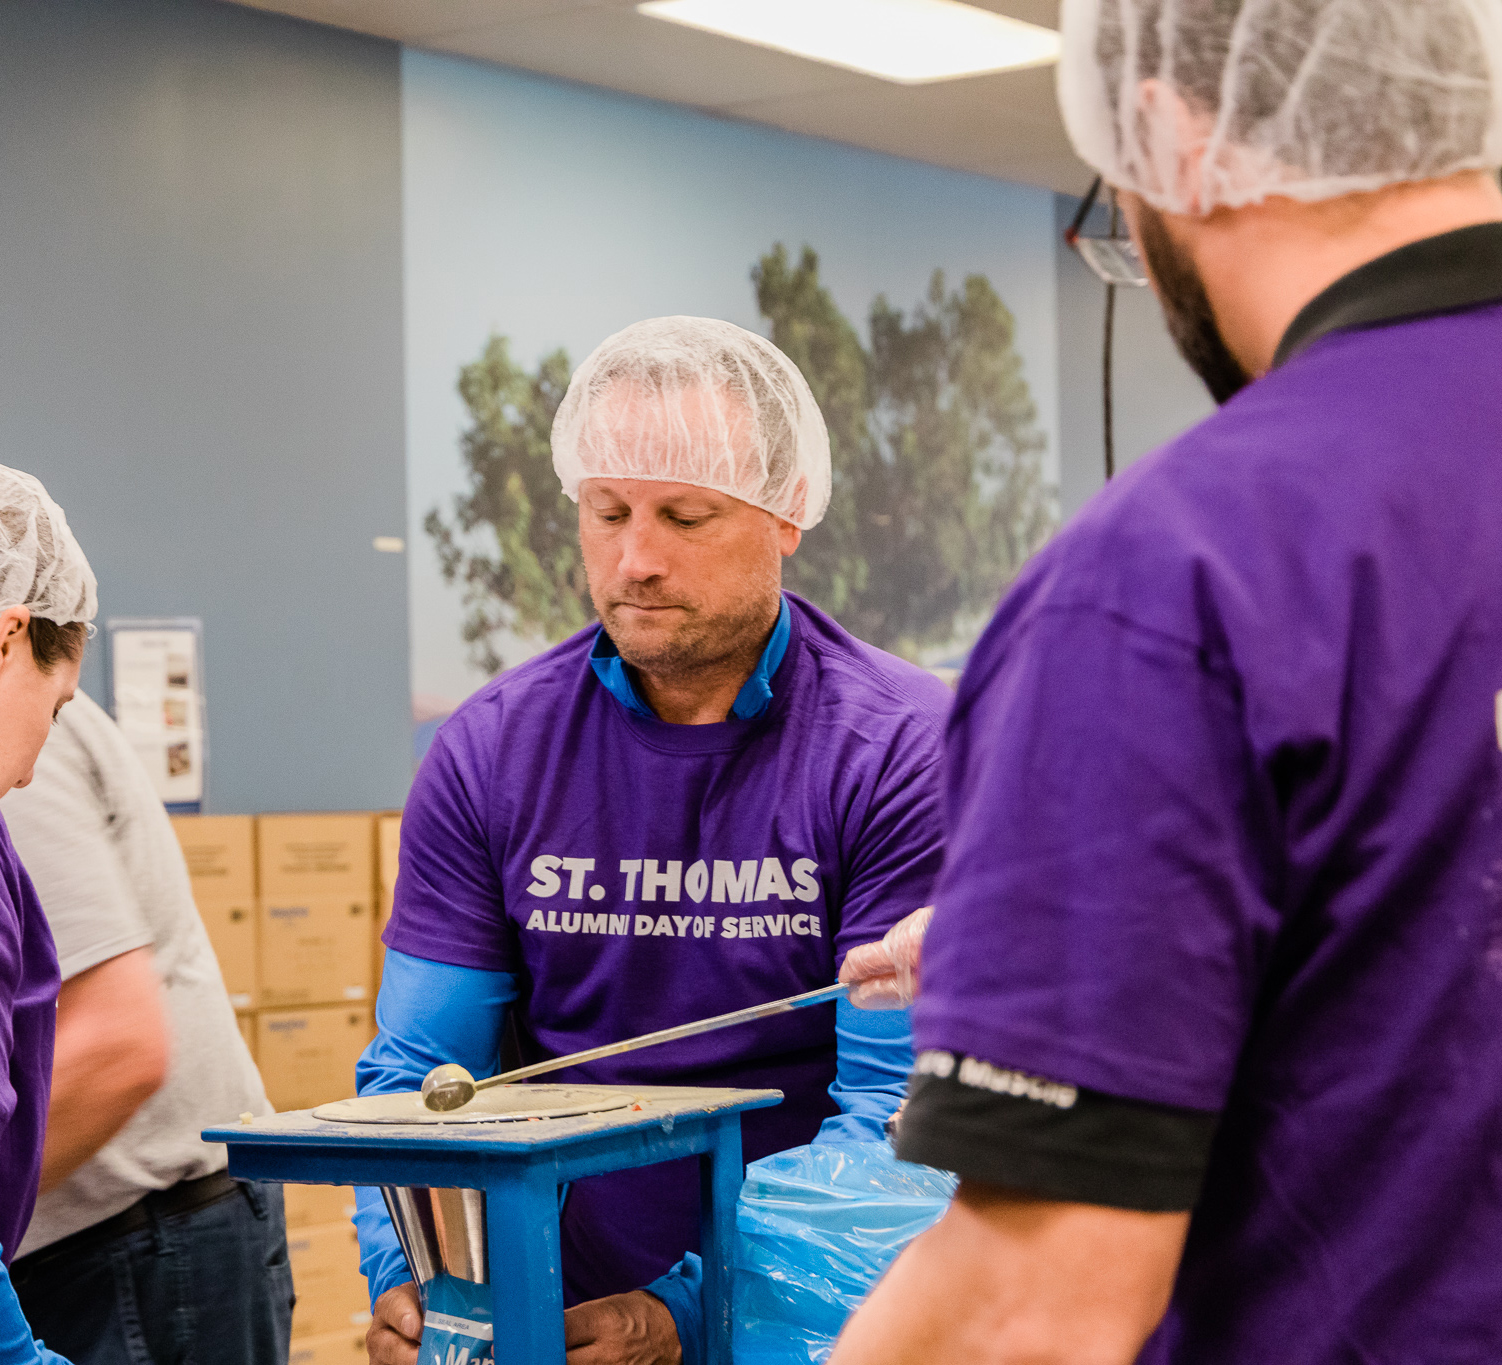 3m employee pours grain during a volunteer session at feed my starving children